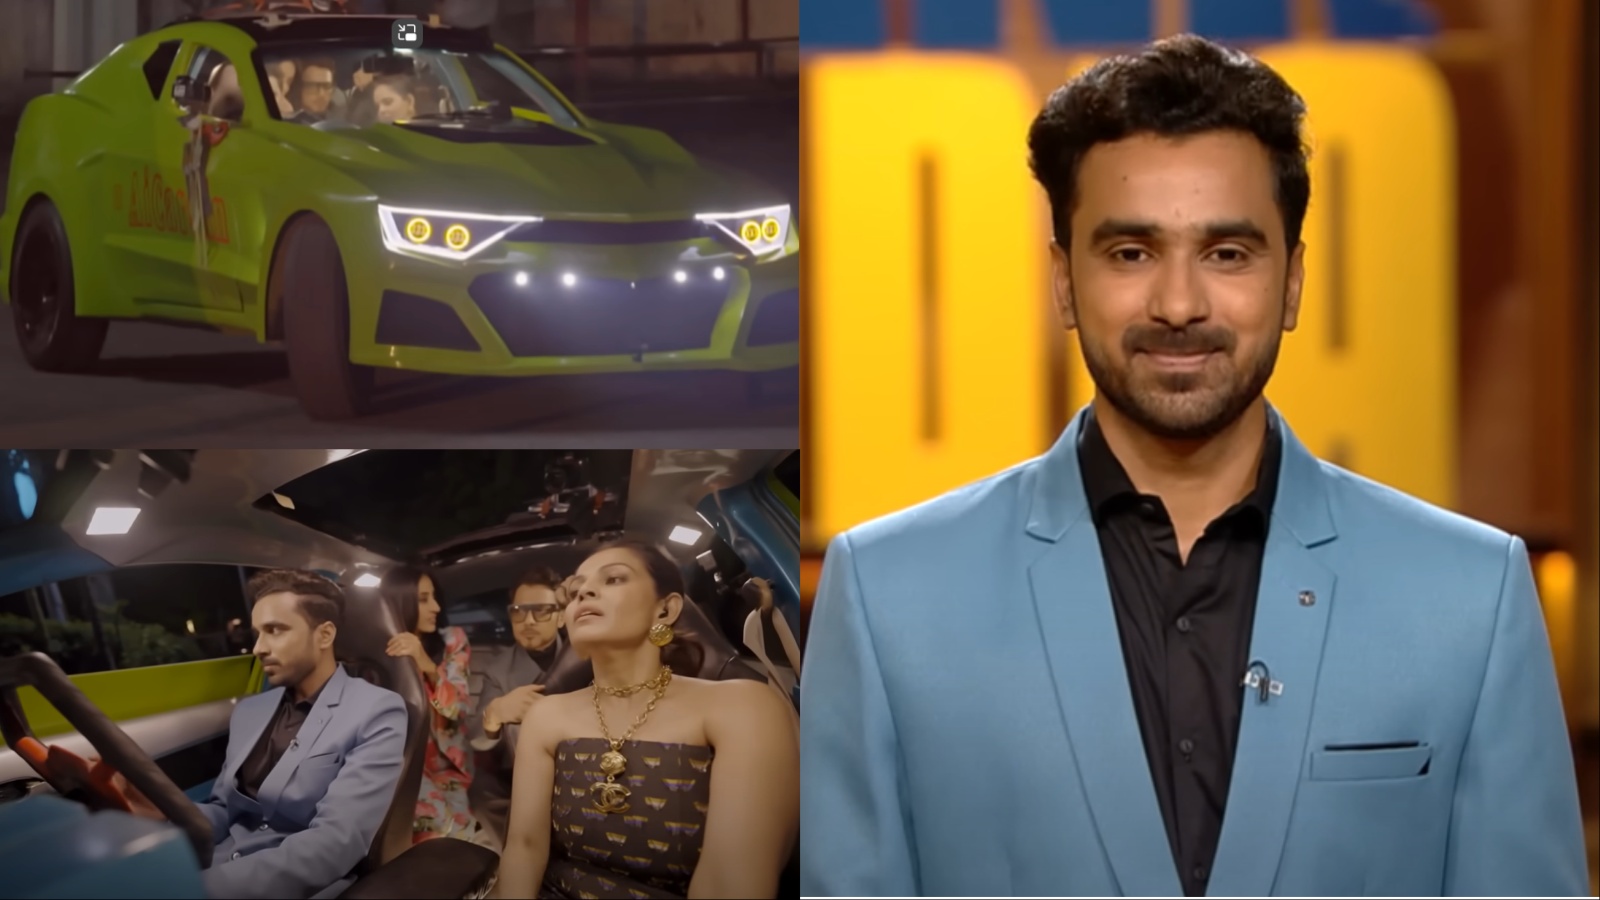 android, shark tank india: judges take test drive of india’s first ‘ai car’, ask pitcher to find a job. watch